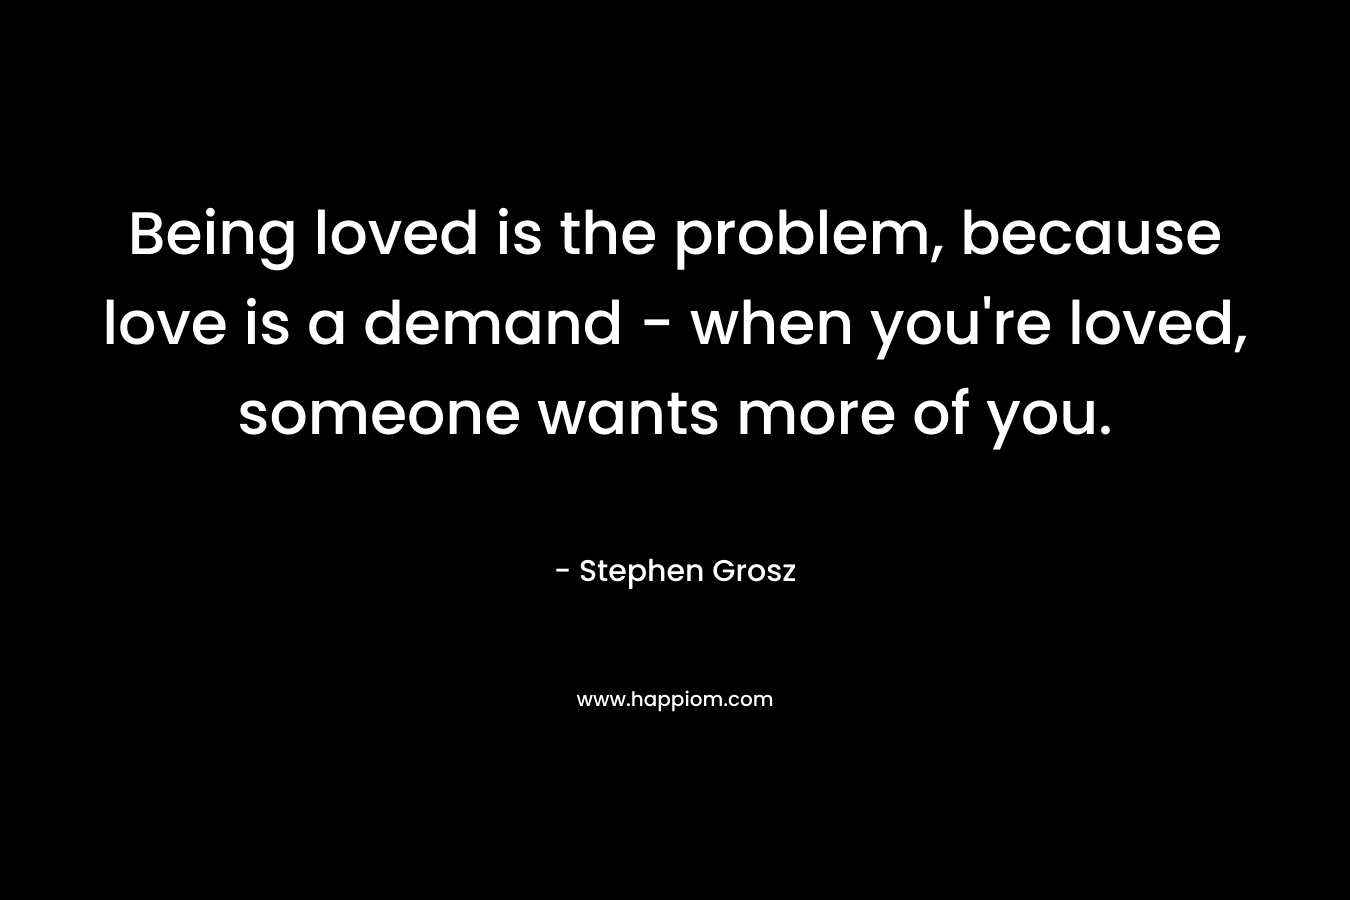 Being loved is the problem, because love is a demand - when you're loved, someone wants more of you.